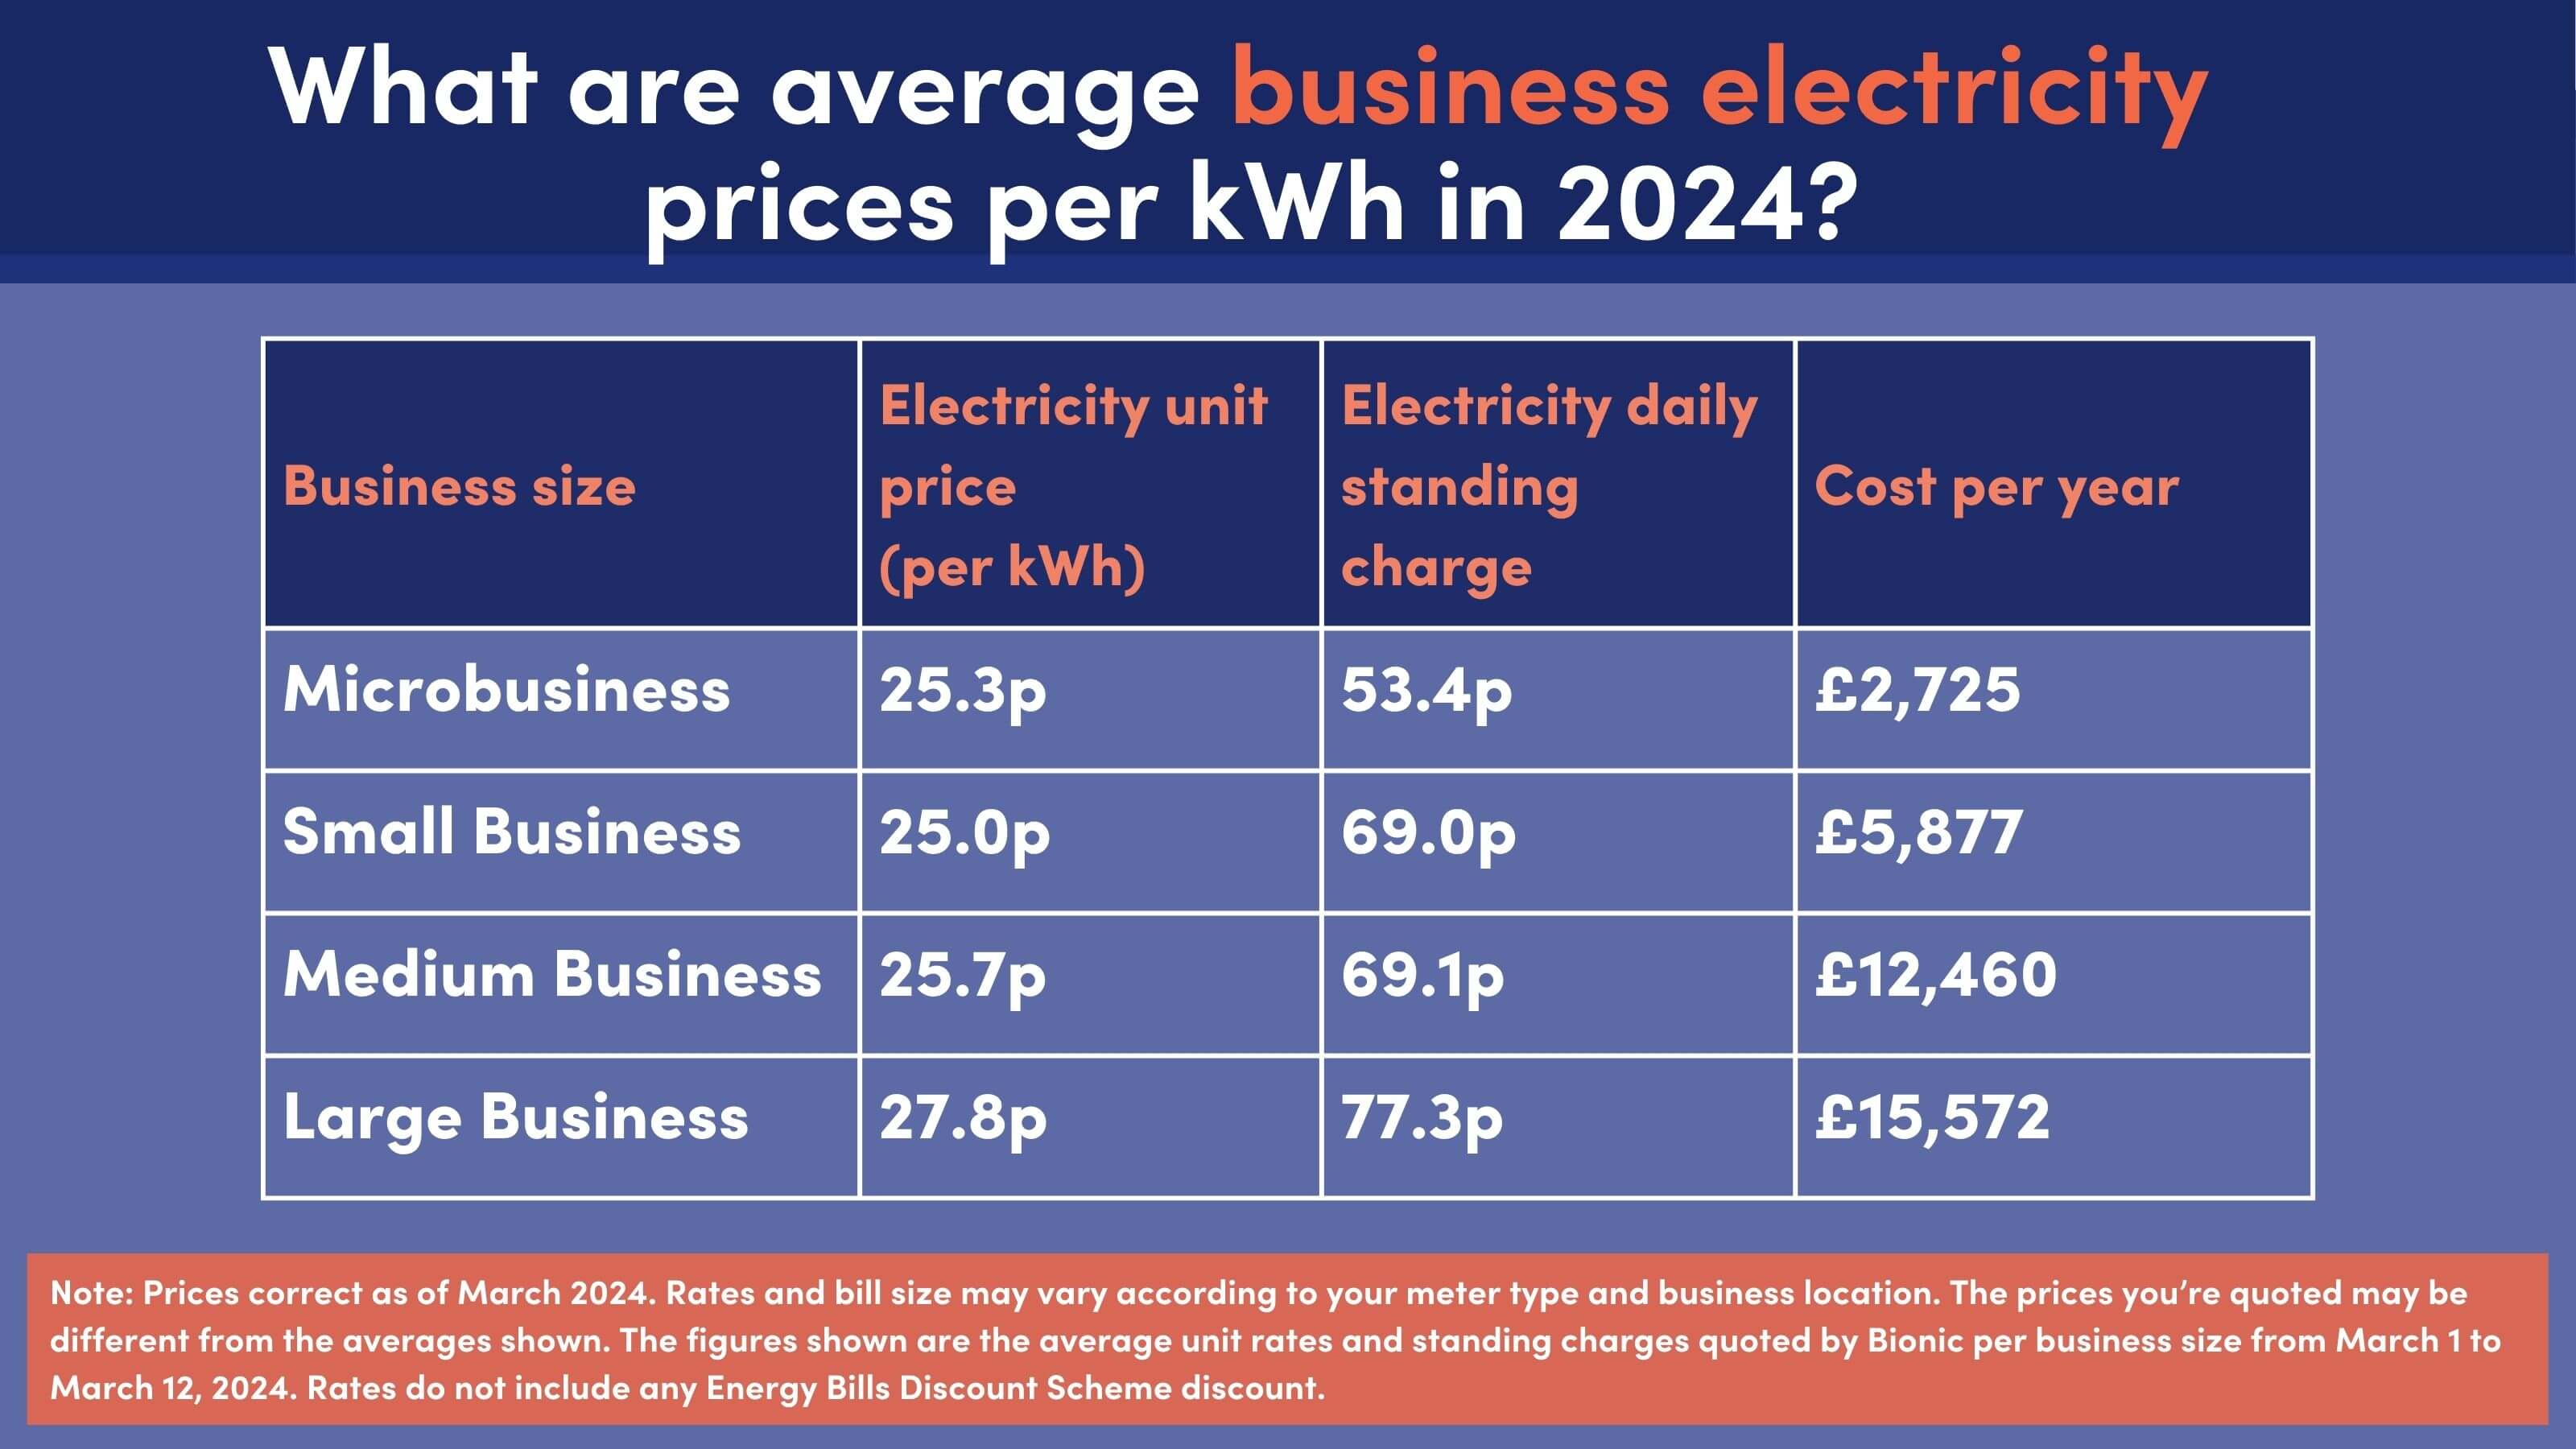 Average business electricity prices per KWH March 2024